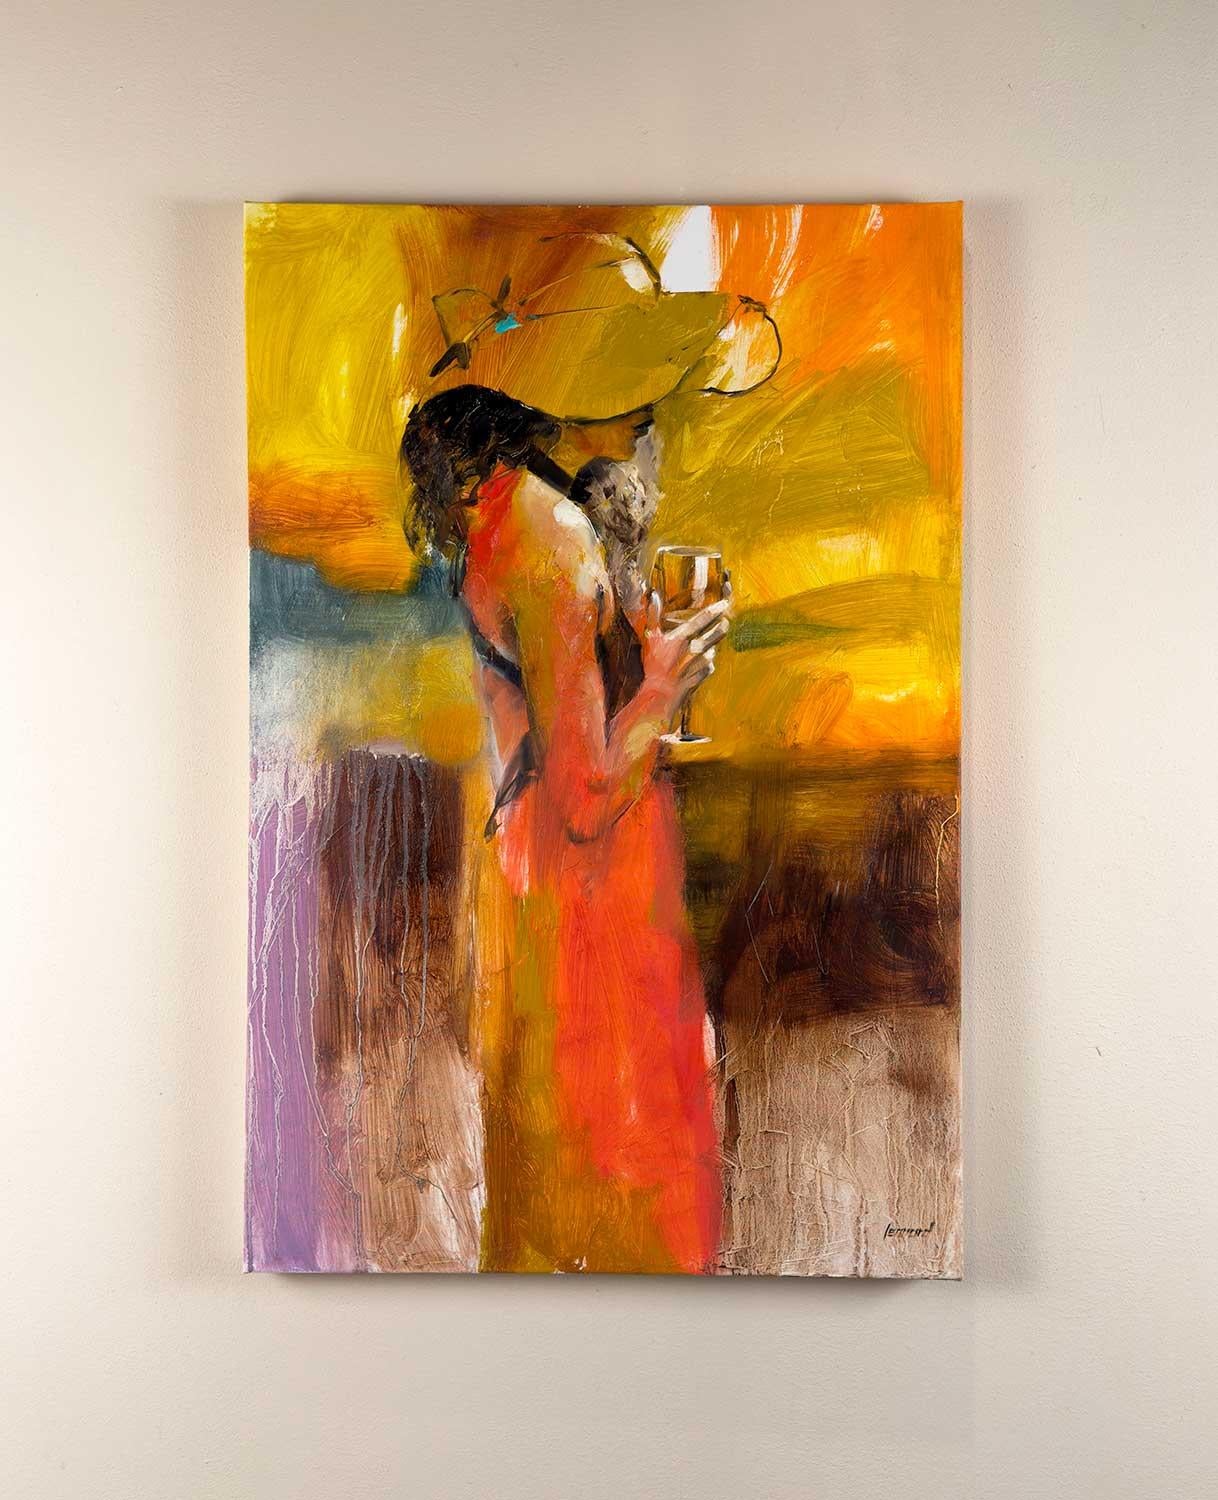 <p>Artist Comments<br>Artist Gary Leonard presents a portrait of a woman in a tropical setting. He paints with an impressionist approach but leaves the background subtly abstract to draw focus on the subject. Celebrating peaceful, warm moments, the